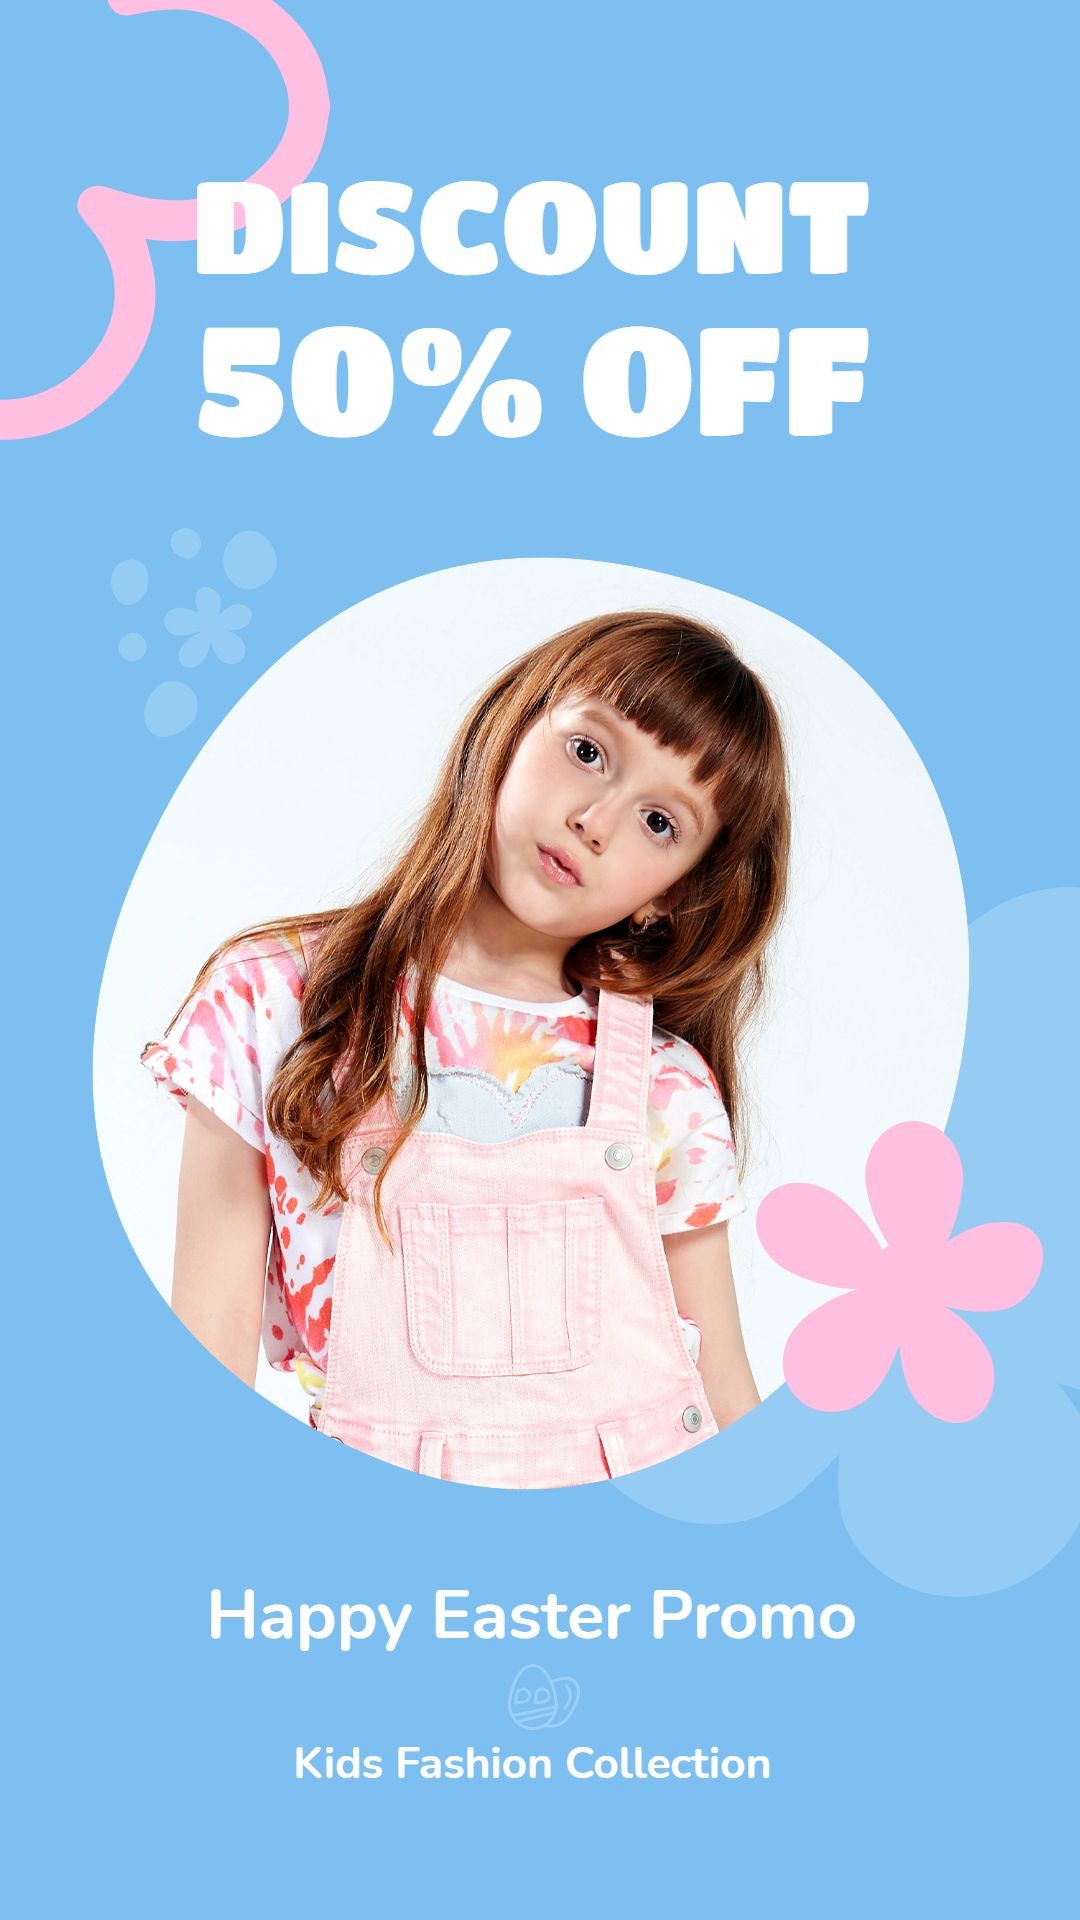 Hand Painted Pink Flower Element Easter Children's Fashion Sale Promotion Ecommerce Story预览效果